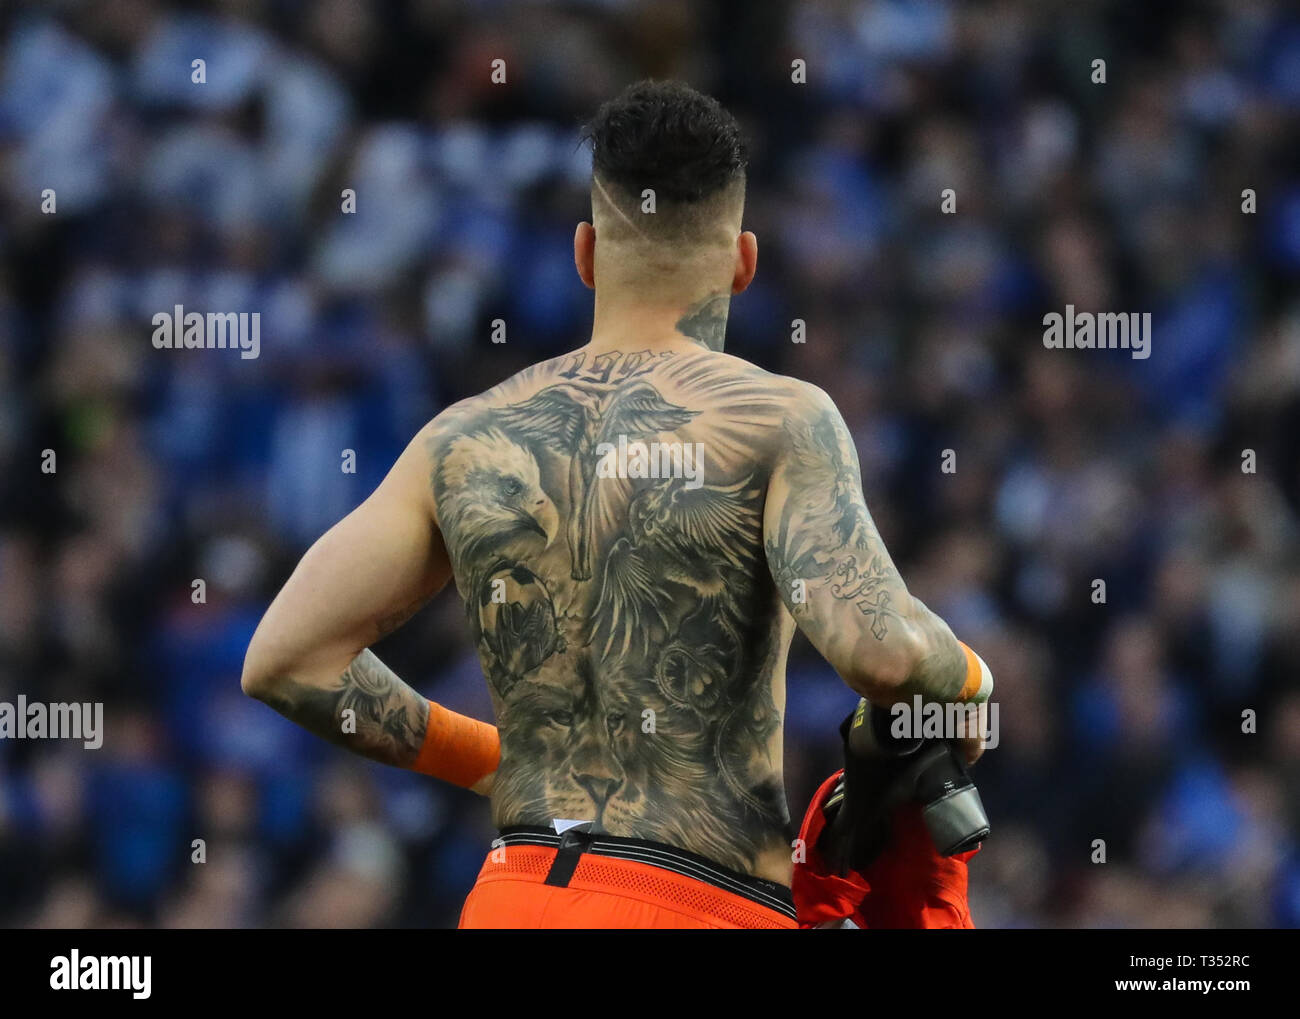 Tattoo On Neck Ederson Manchester City Editorial Stock Photo - Stock Image  | Shutterstock